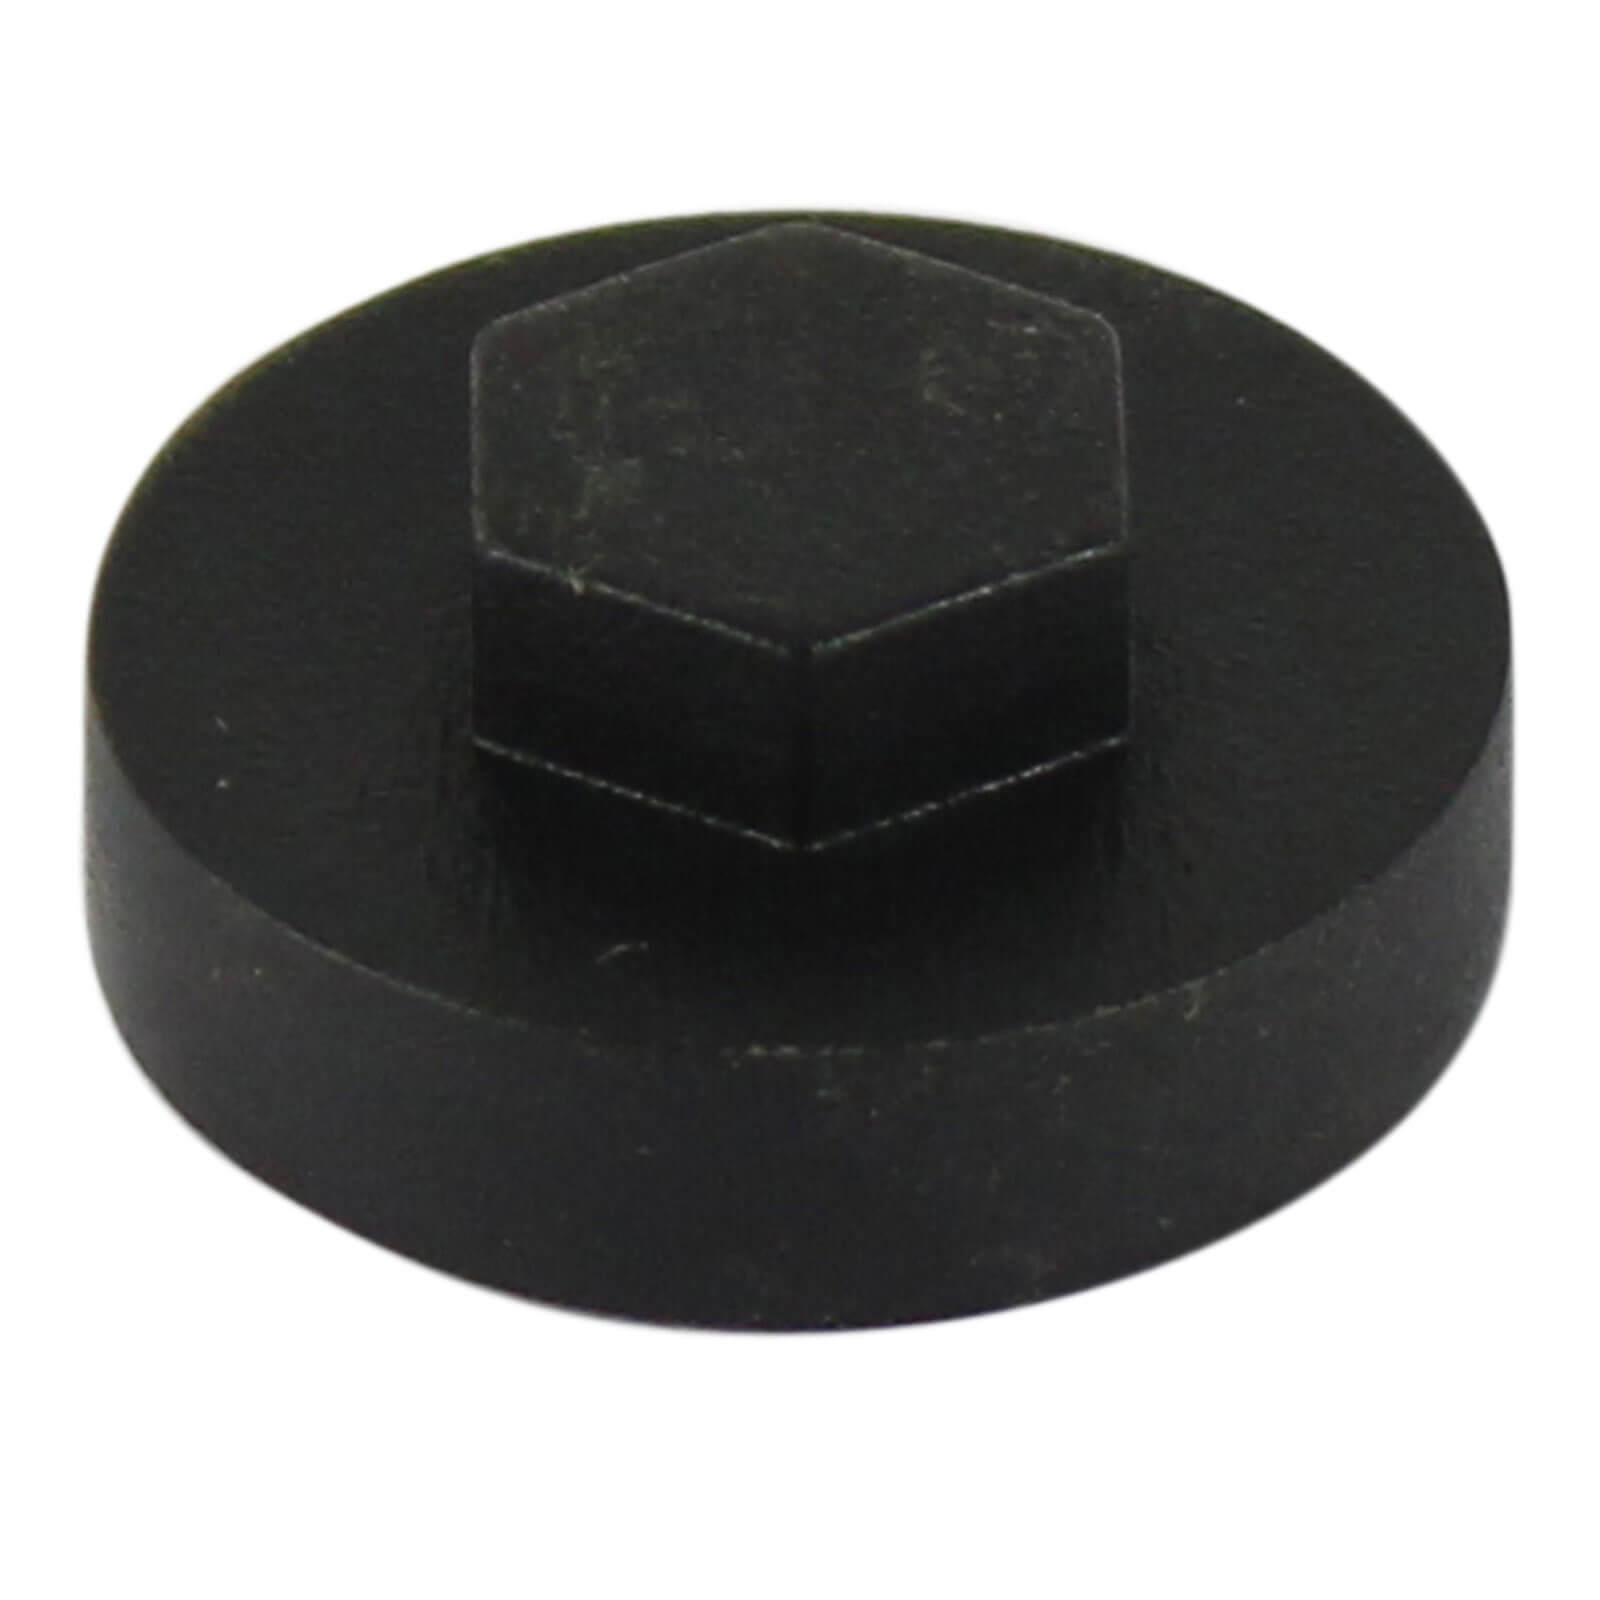 Image of Colour Match Hexagon Screw Cover Cap 5/16" x 16mm Black Pack of 1000